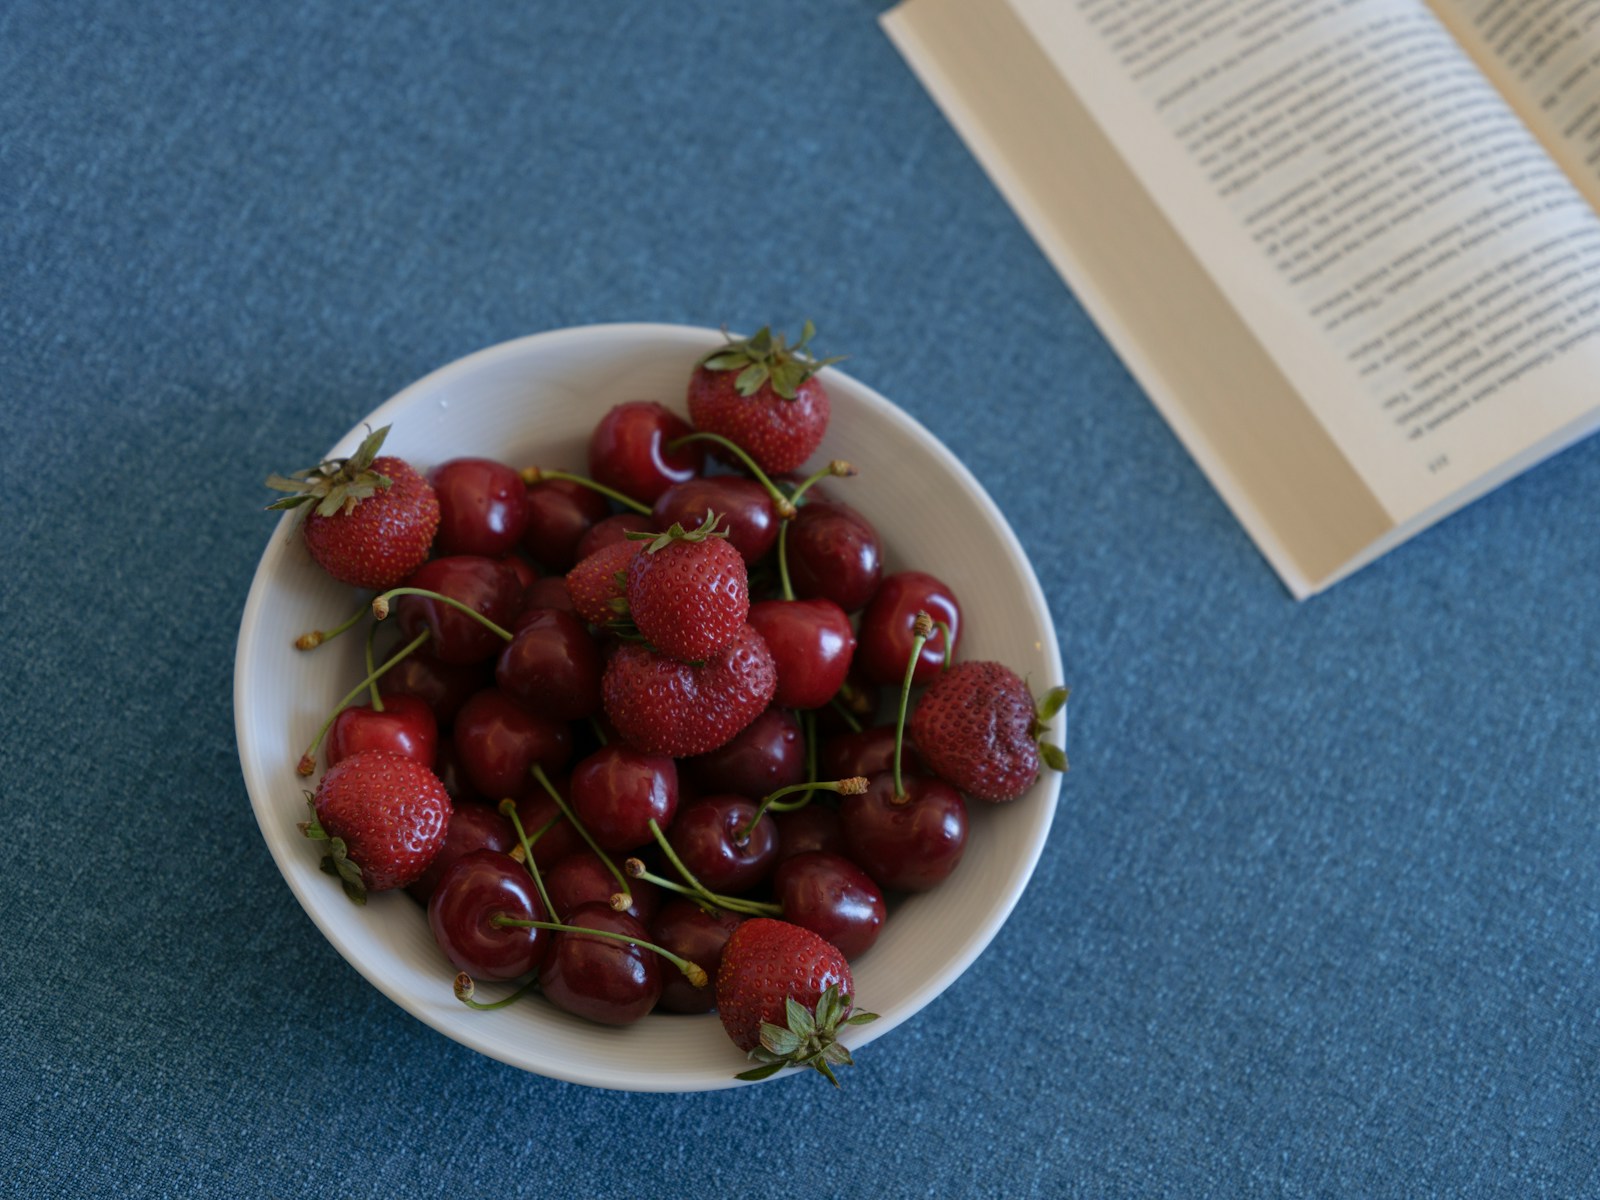 a bowl of cherries on a table next to a book